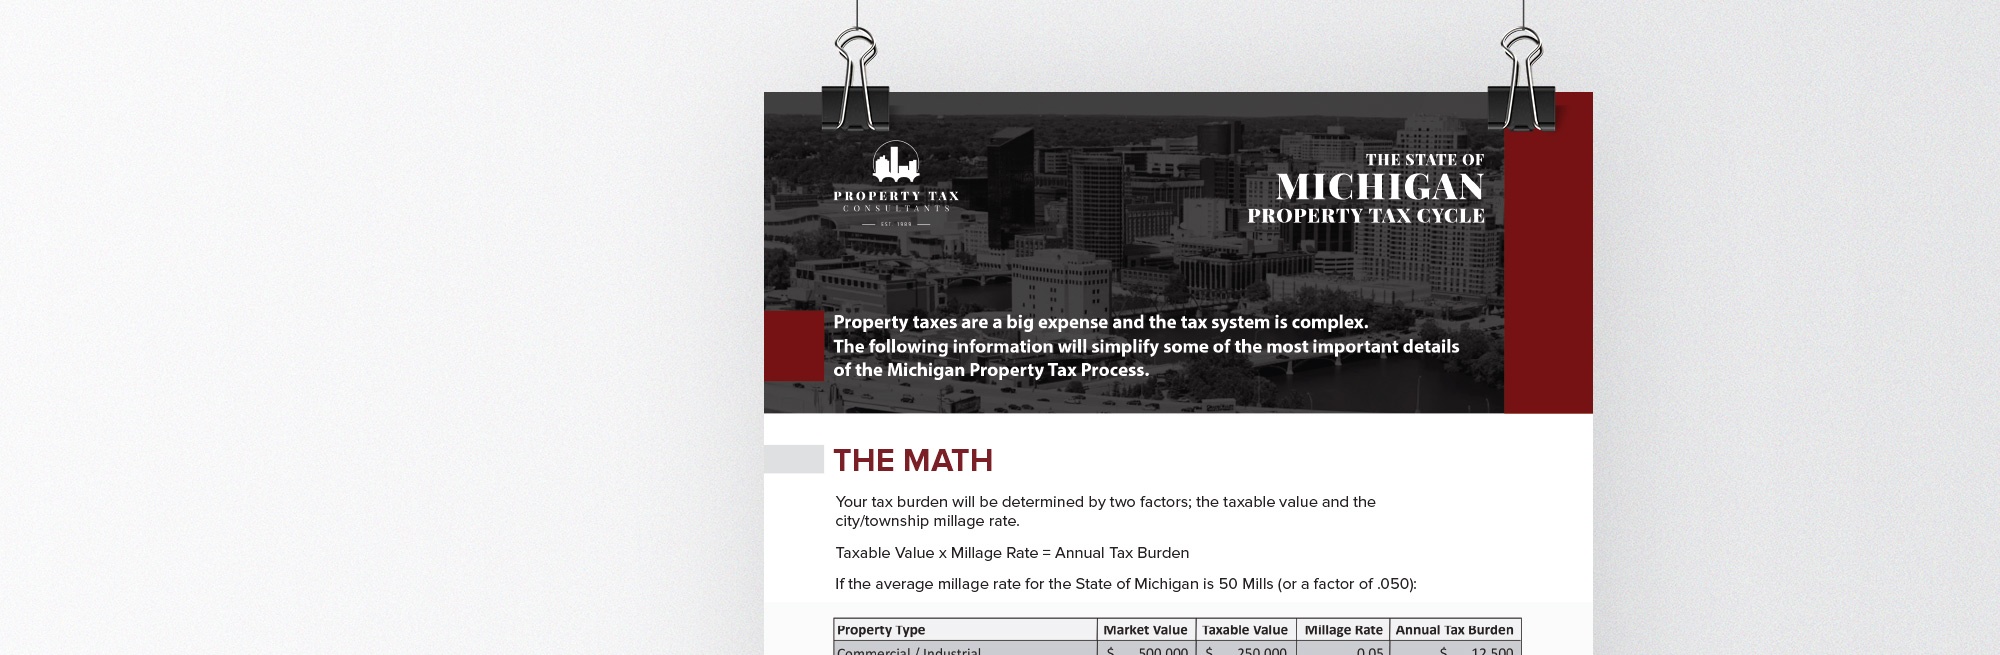 201801_PTC_the-state-of-michigan-property-tax-cycle_Header.jpg